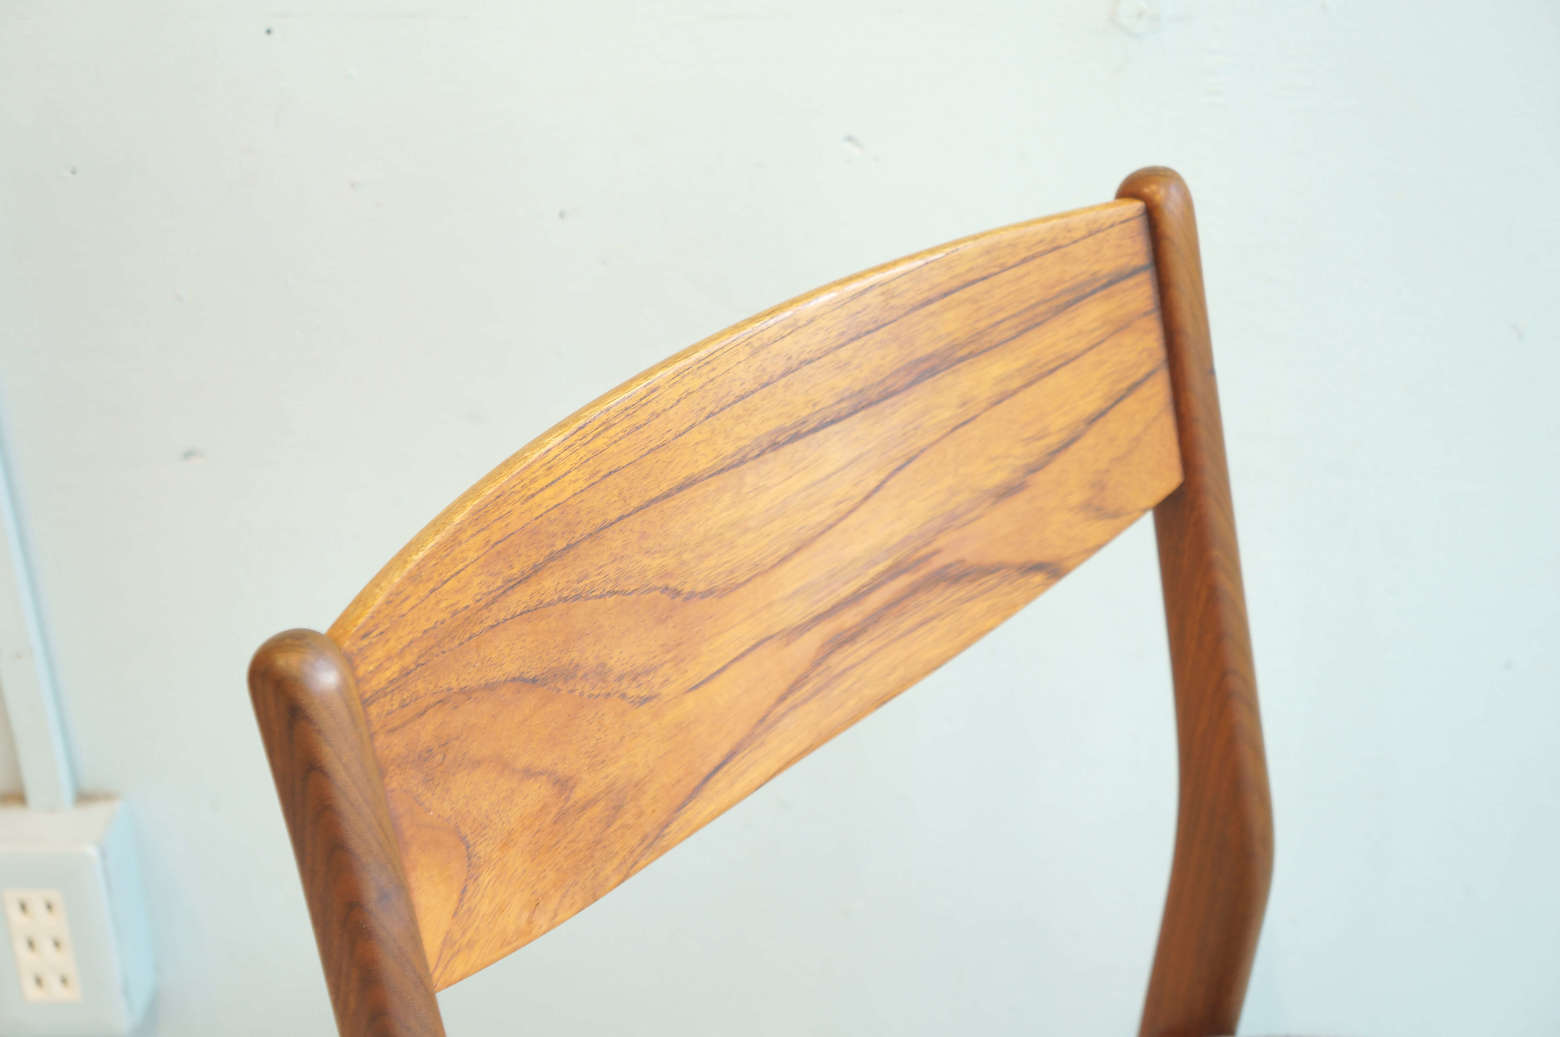 Danish Vintage Dining Chair/デンマーク ヴィンテージ ダイニングチェア 1